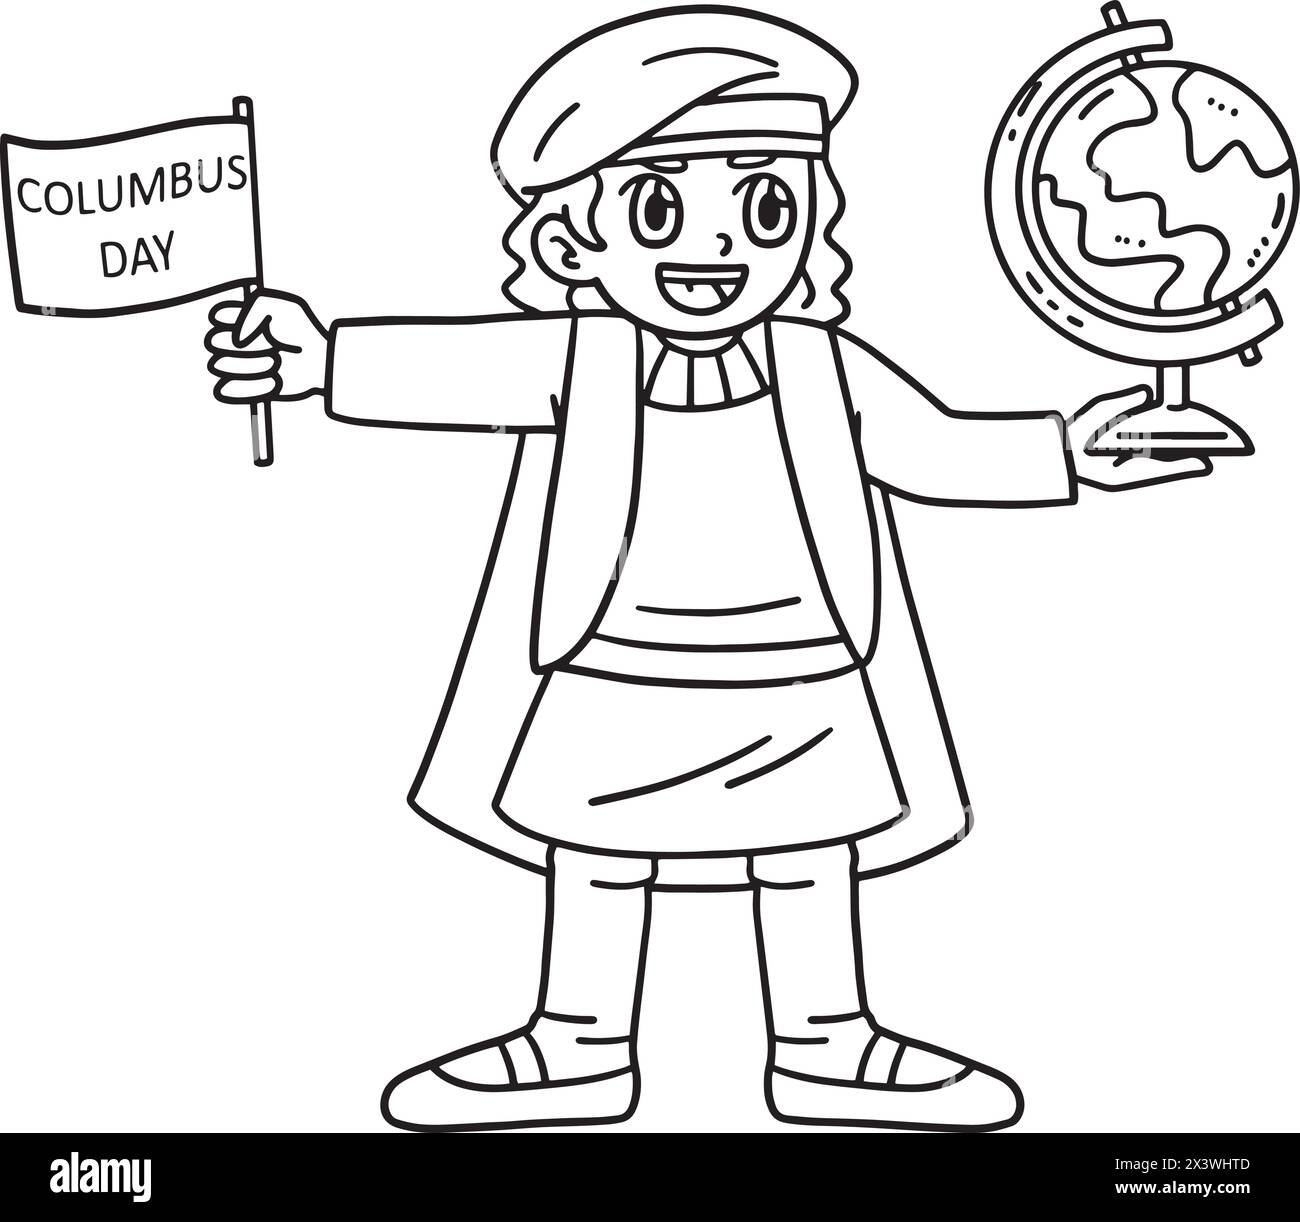 Columbus Day man mit Globe Isolated Coloring Stock Vektor